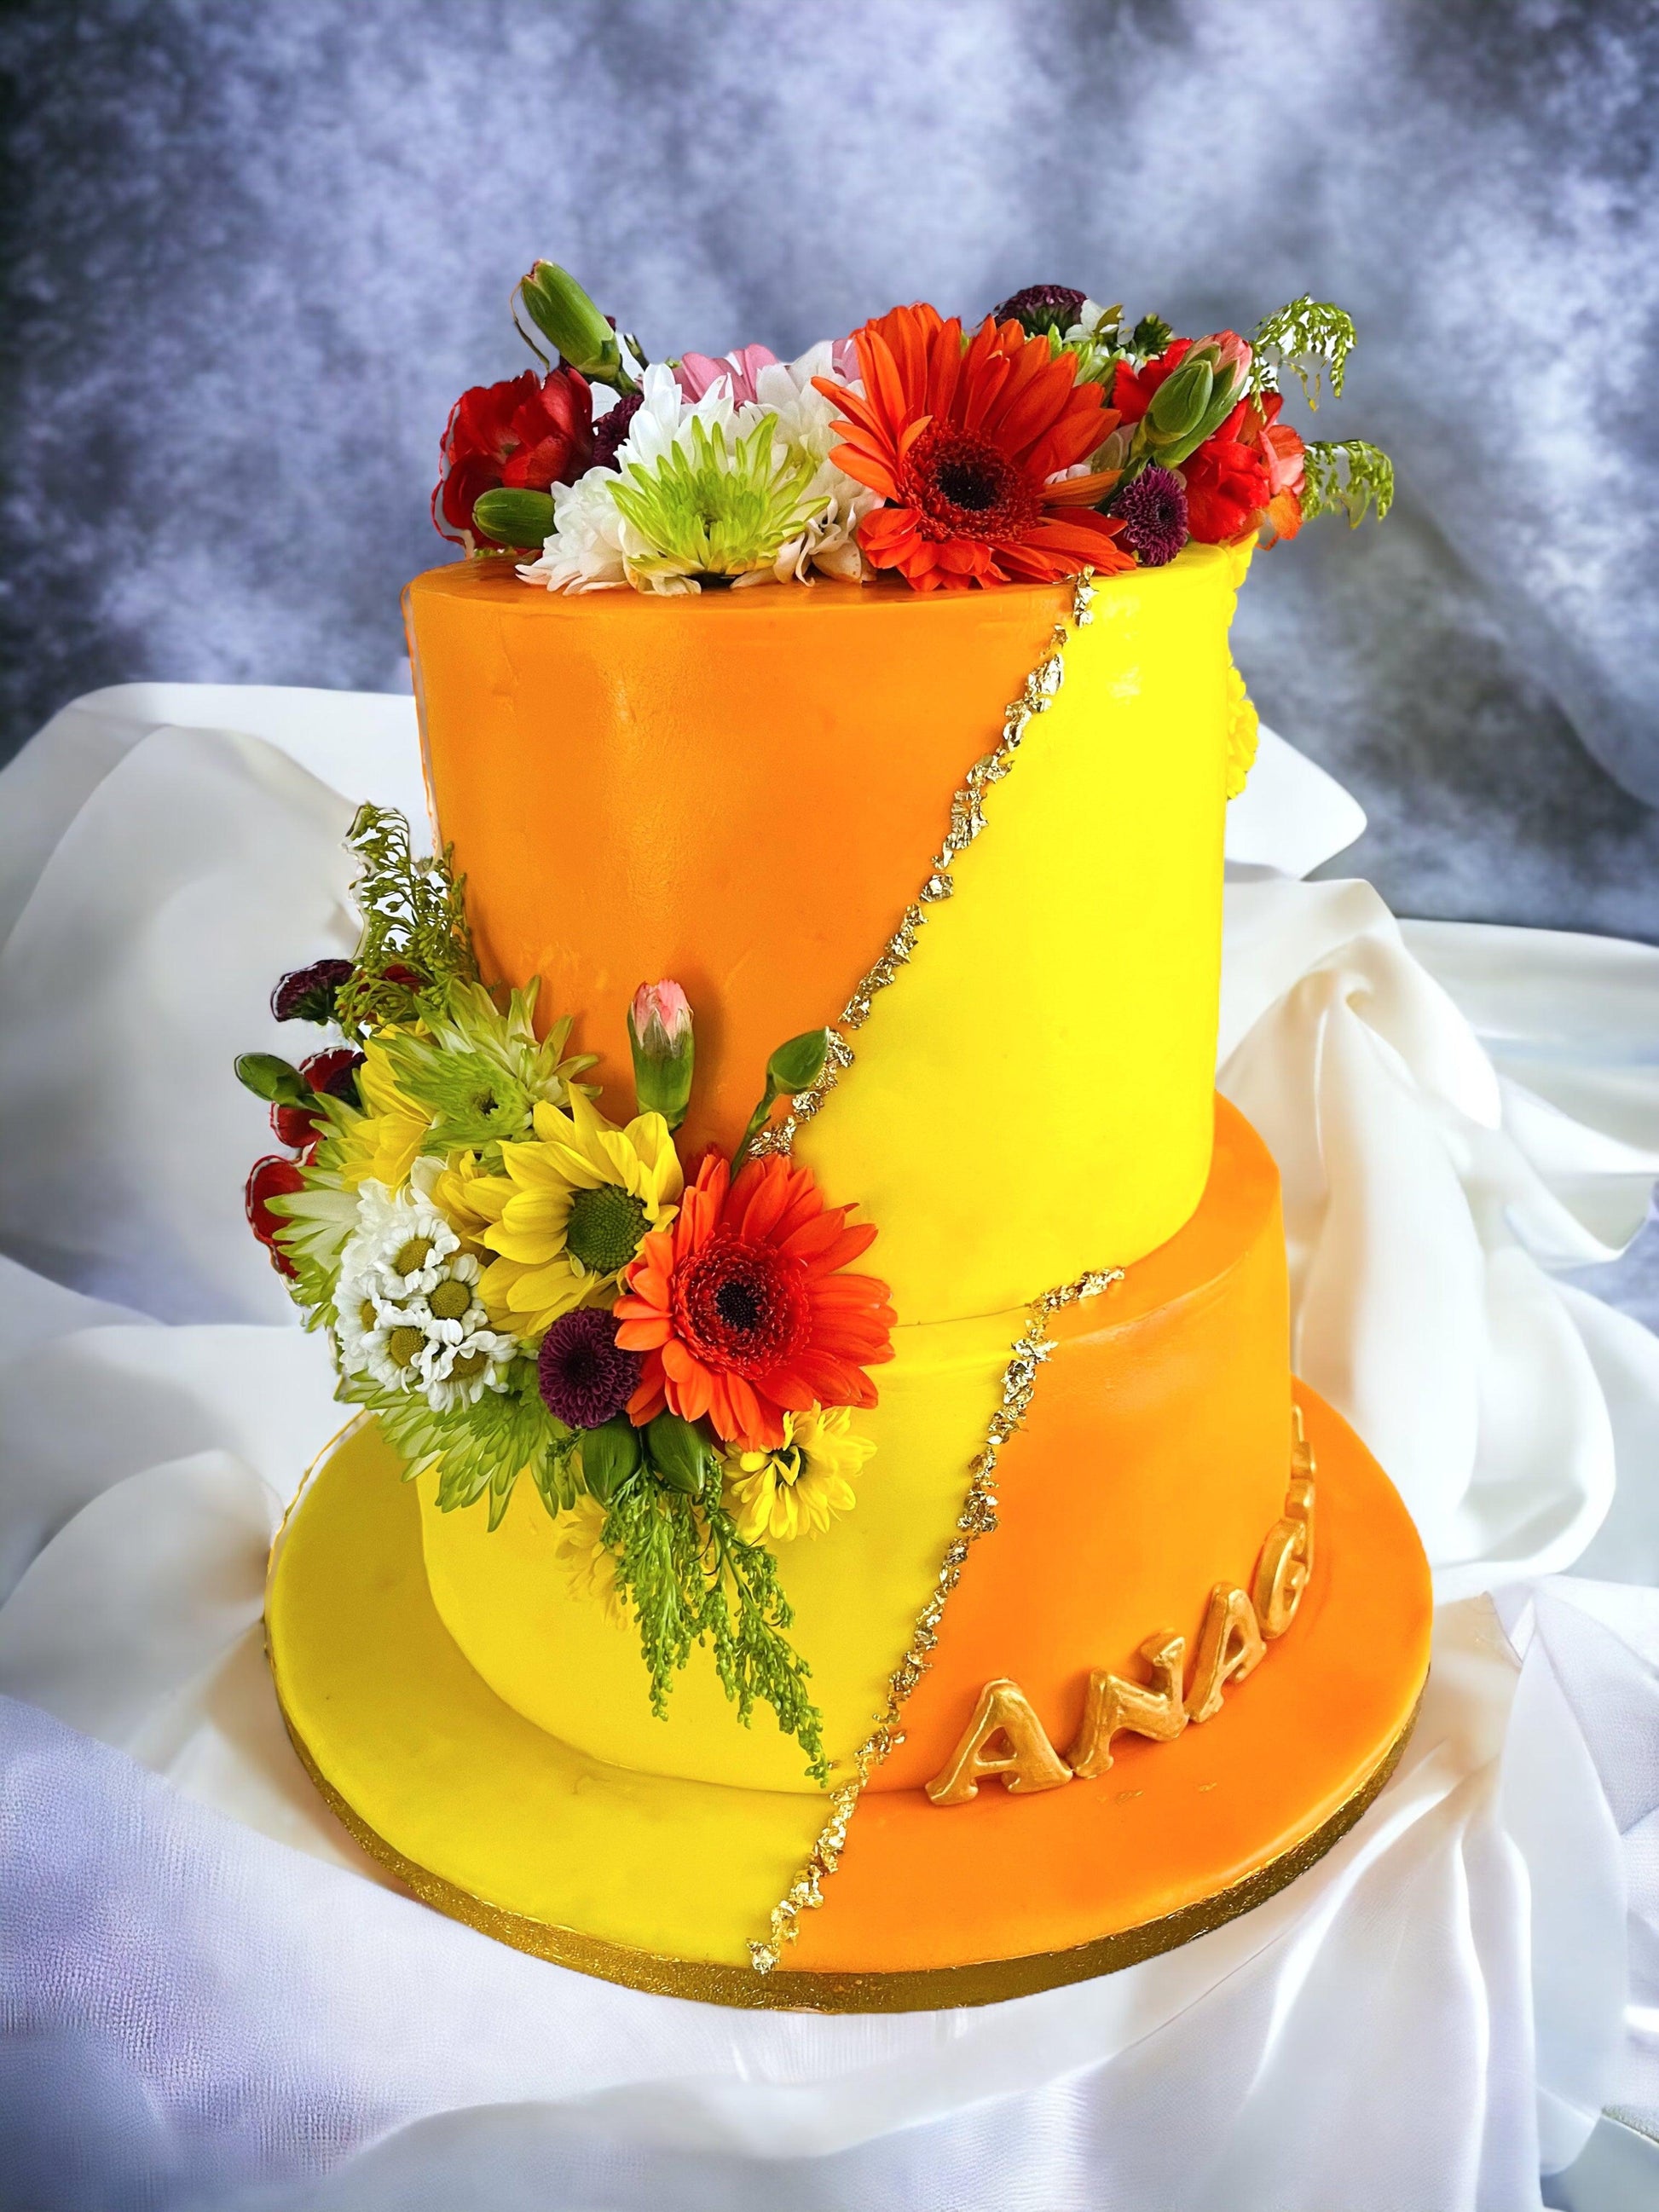 Birthday cake -with fresh flowers - Naturally_deliciousss